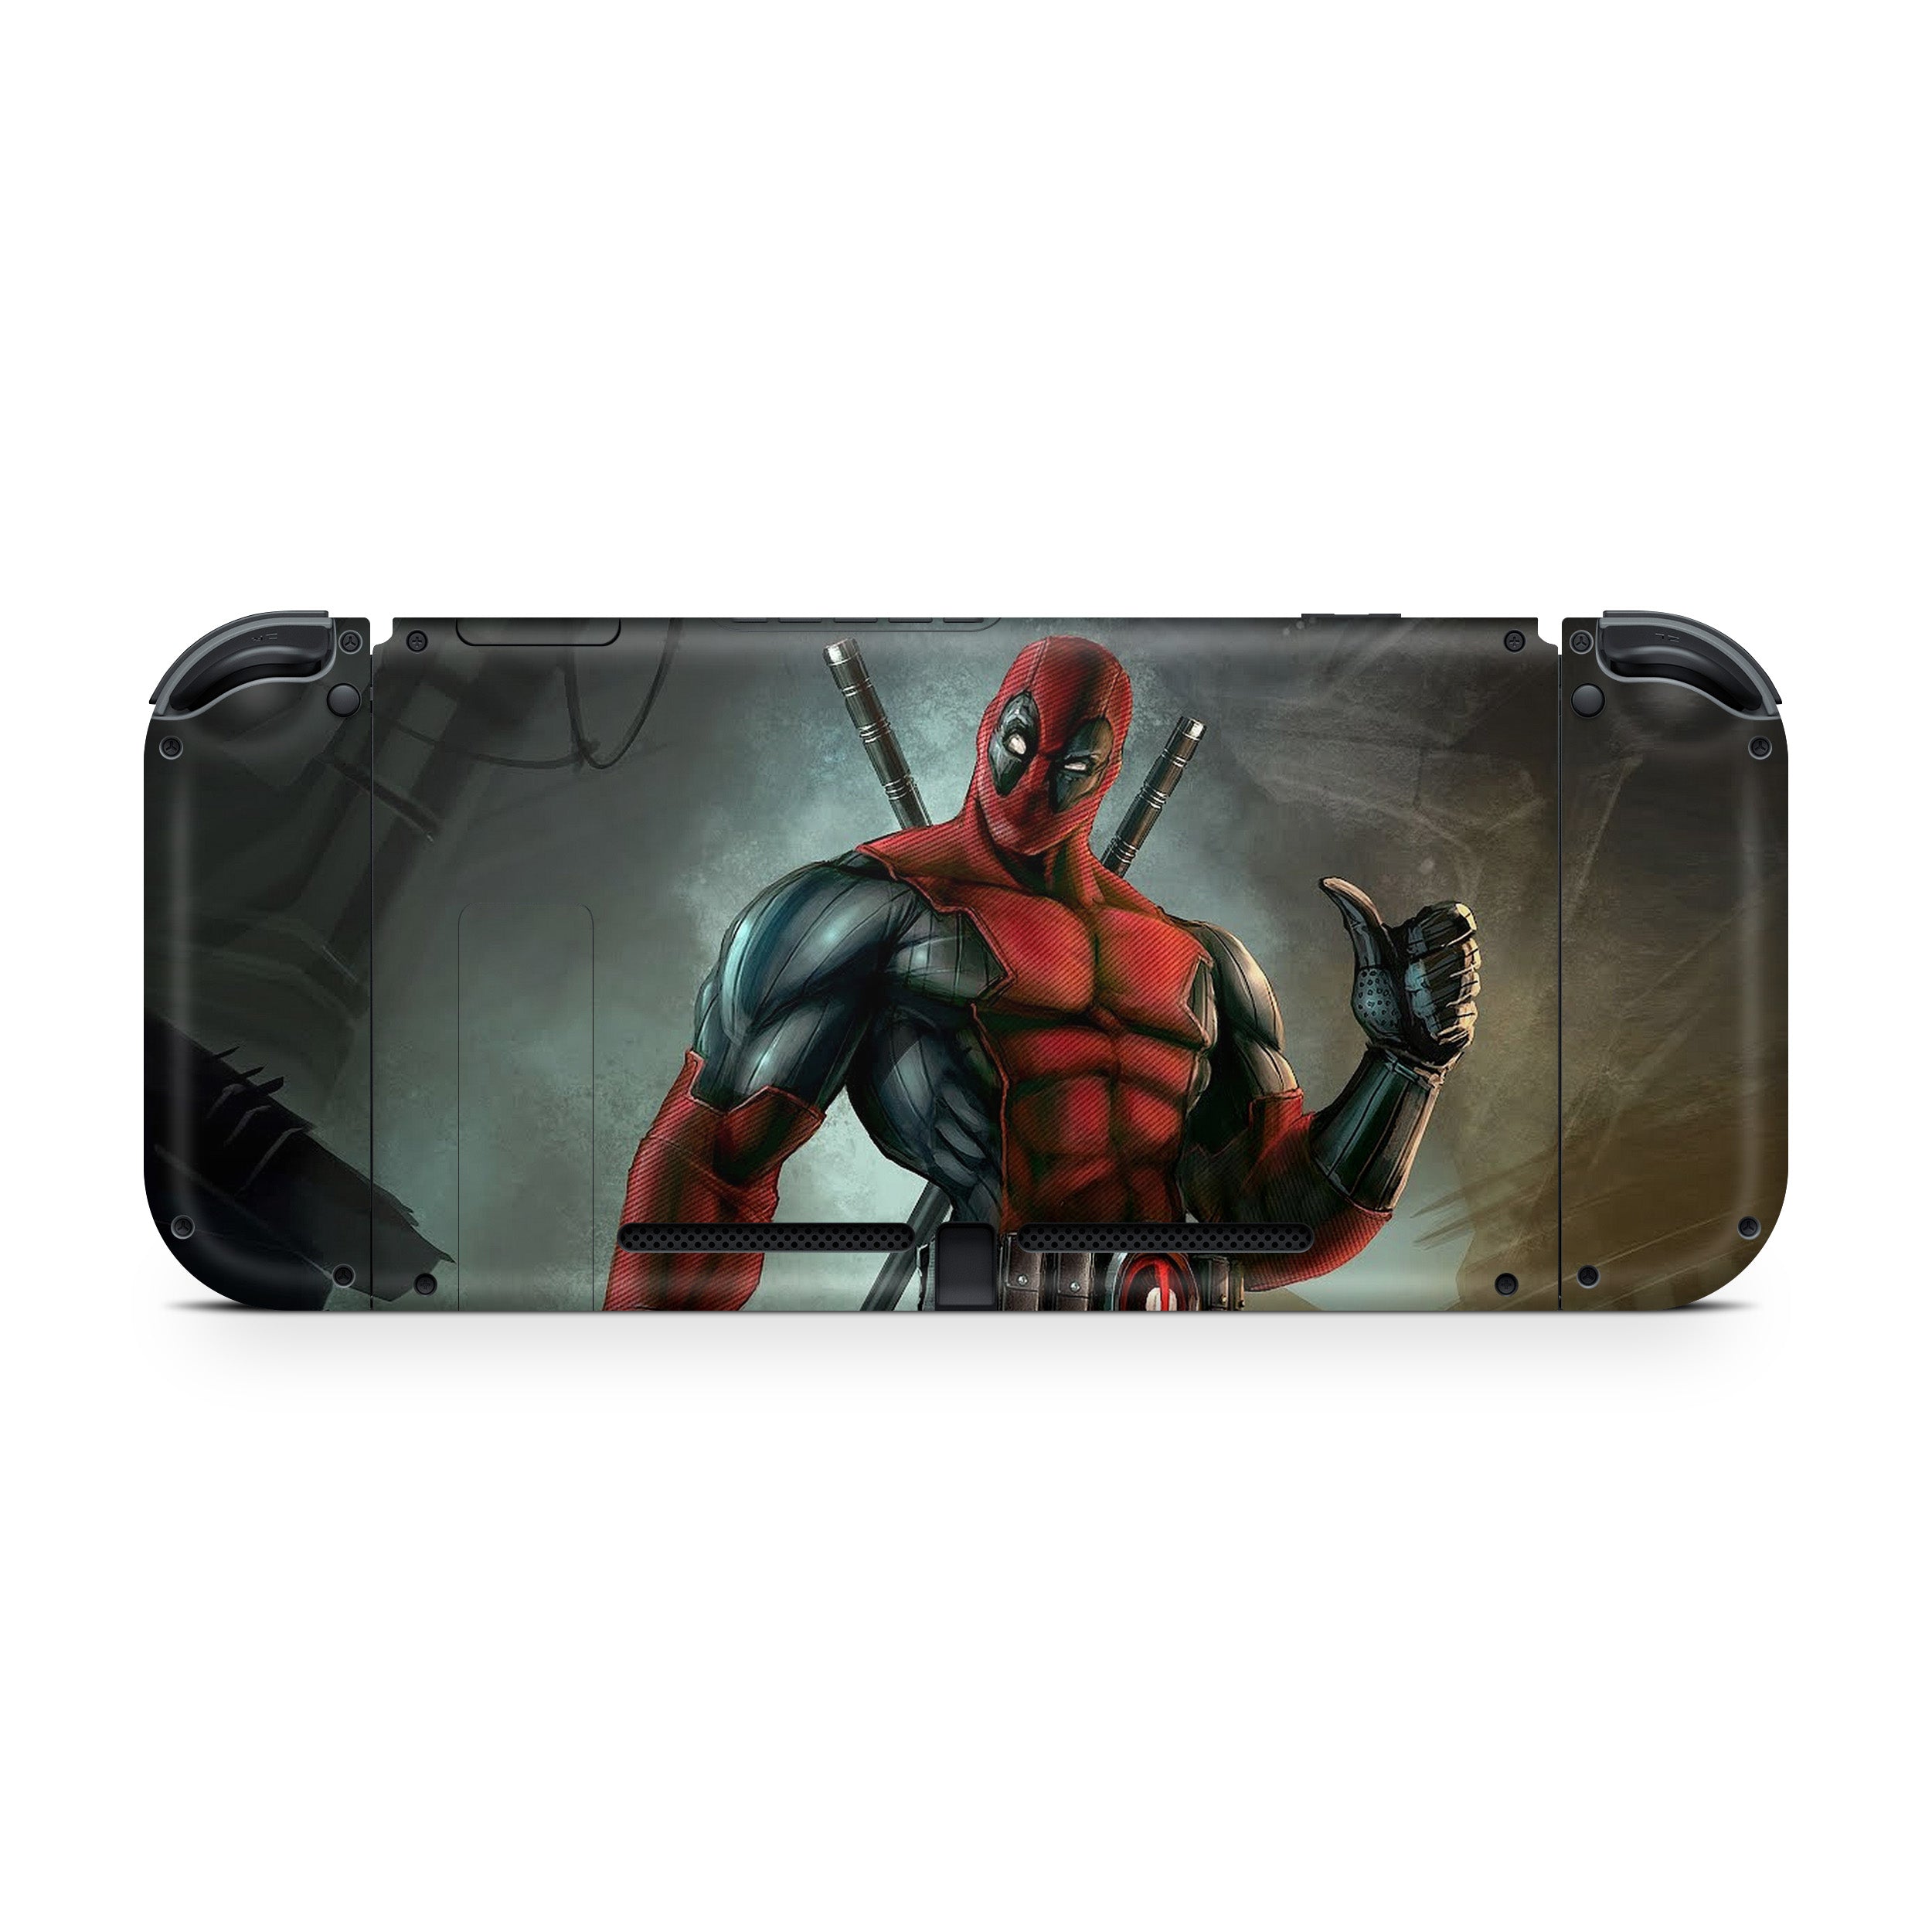 A video game skin featuring a Marvel Comics Deadpool design for the Nintendo Switch.